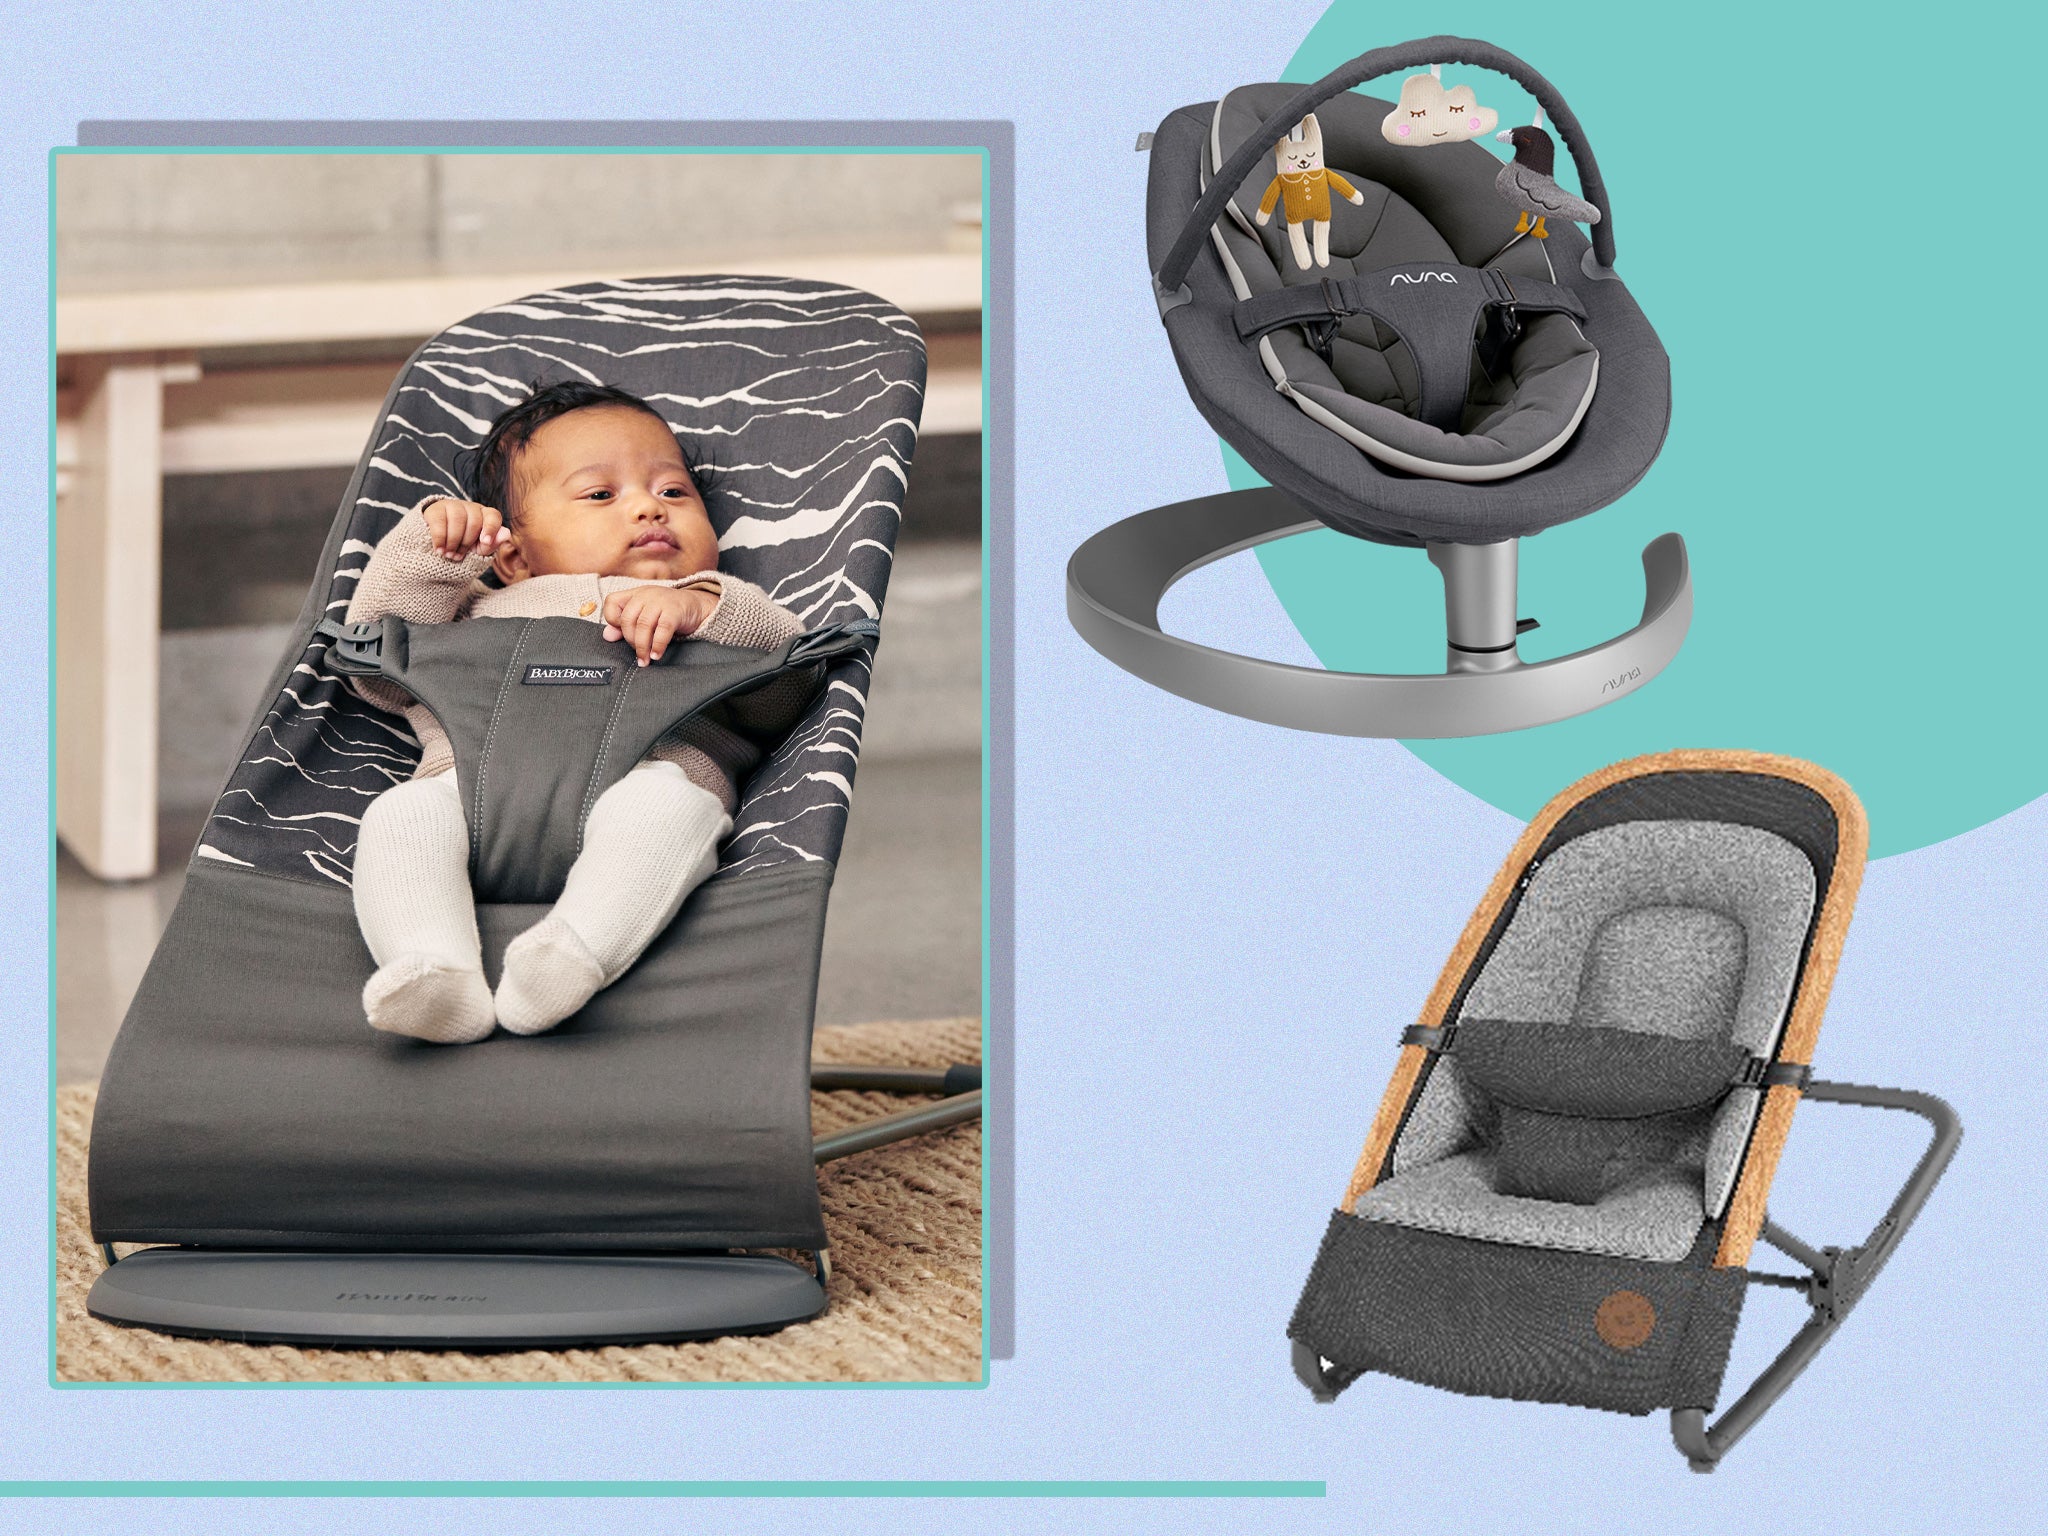 Uddybe sagtmodighed nitrogen Best baby bouncer 2023: From Mamas and Papas, Nuna, Joie, Bjorn, Chicco and  more | The Independent